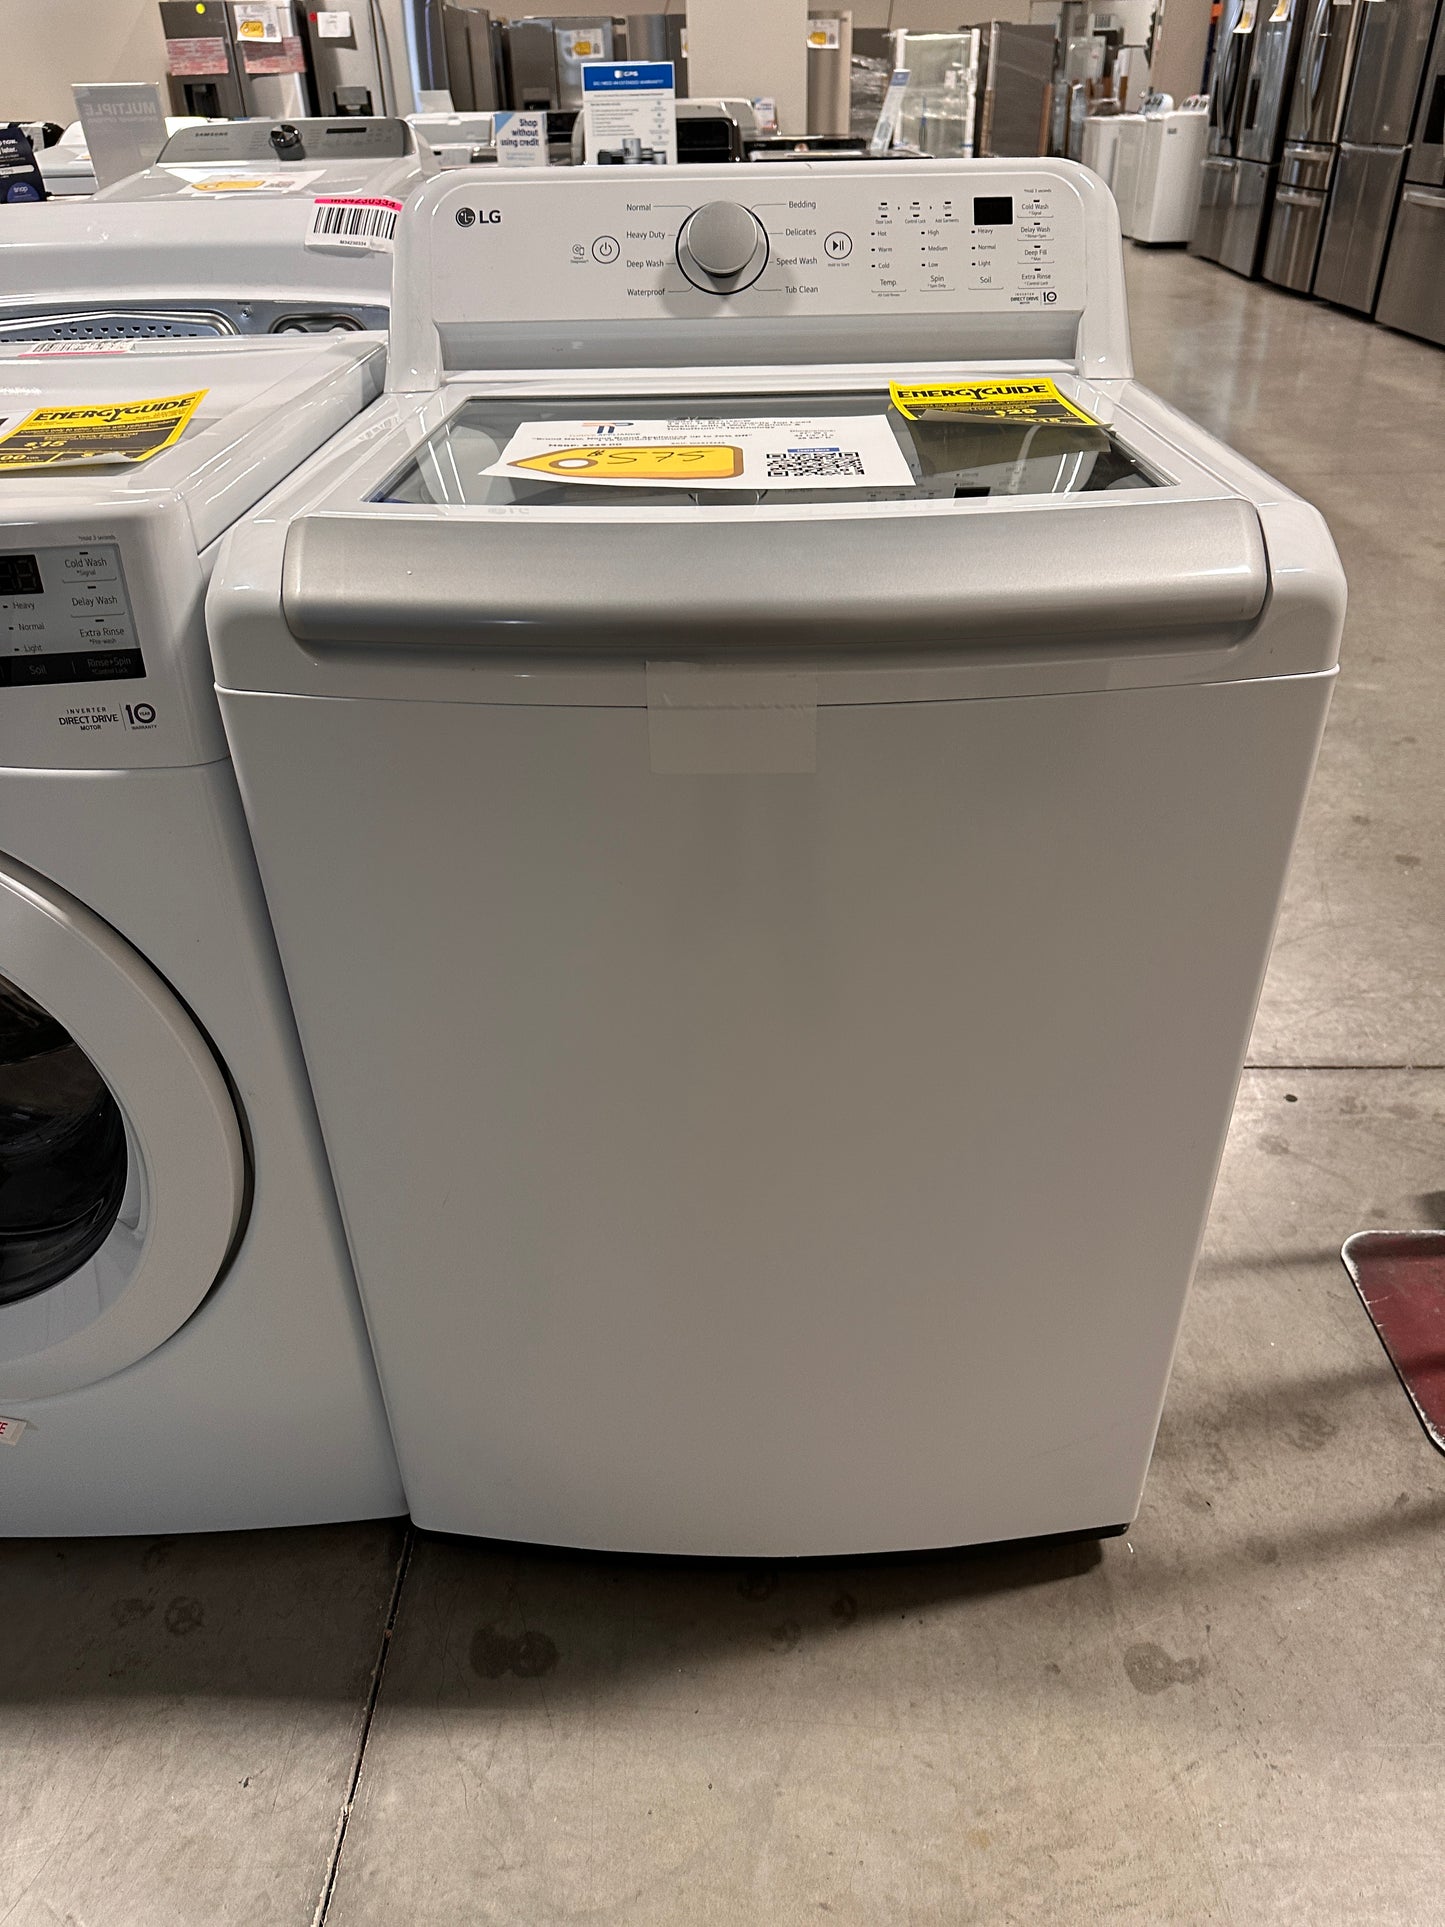 Smart Top Load Washer with 4 Way Agitator - White  MODEL:WT7155CW  WAS13246